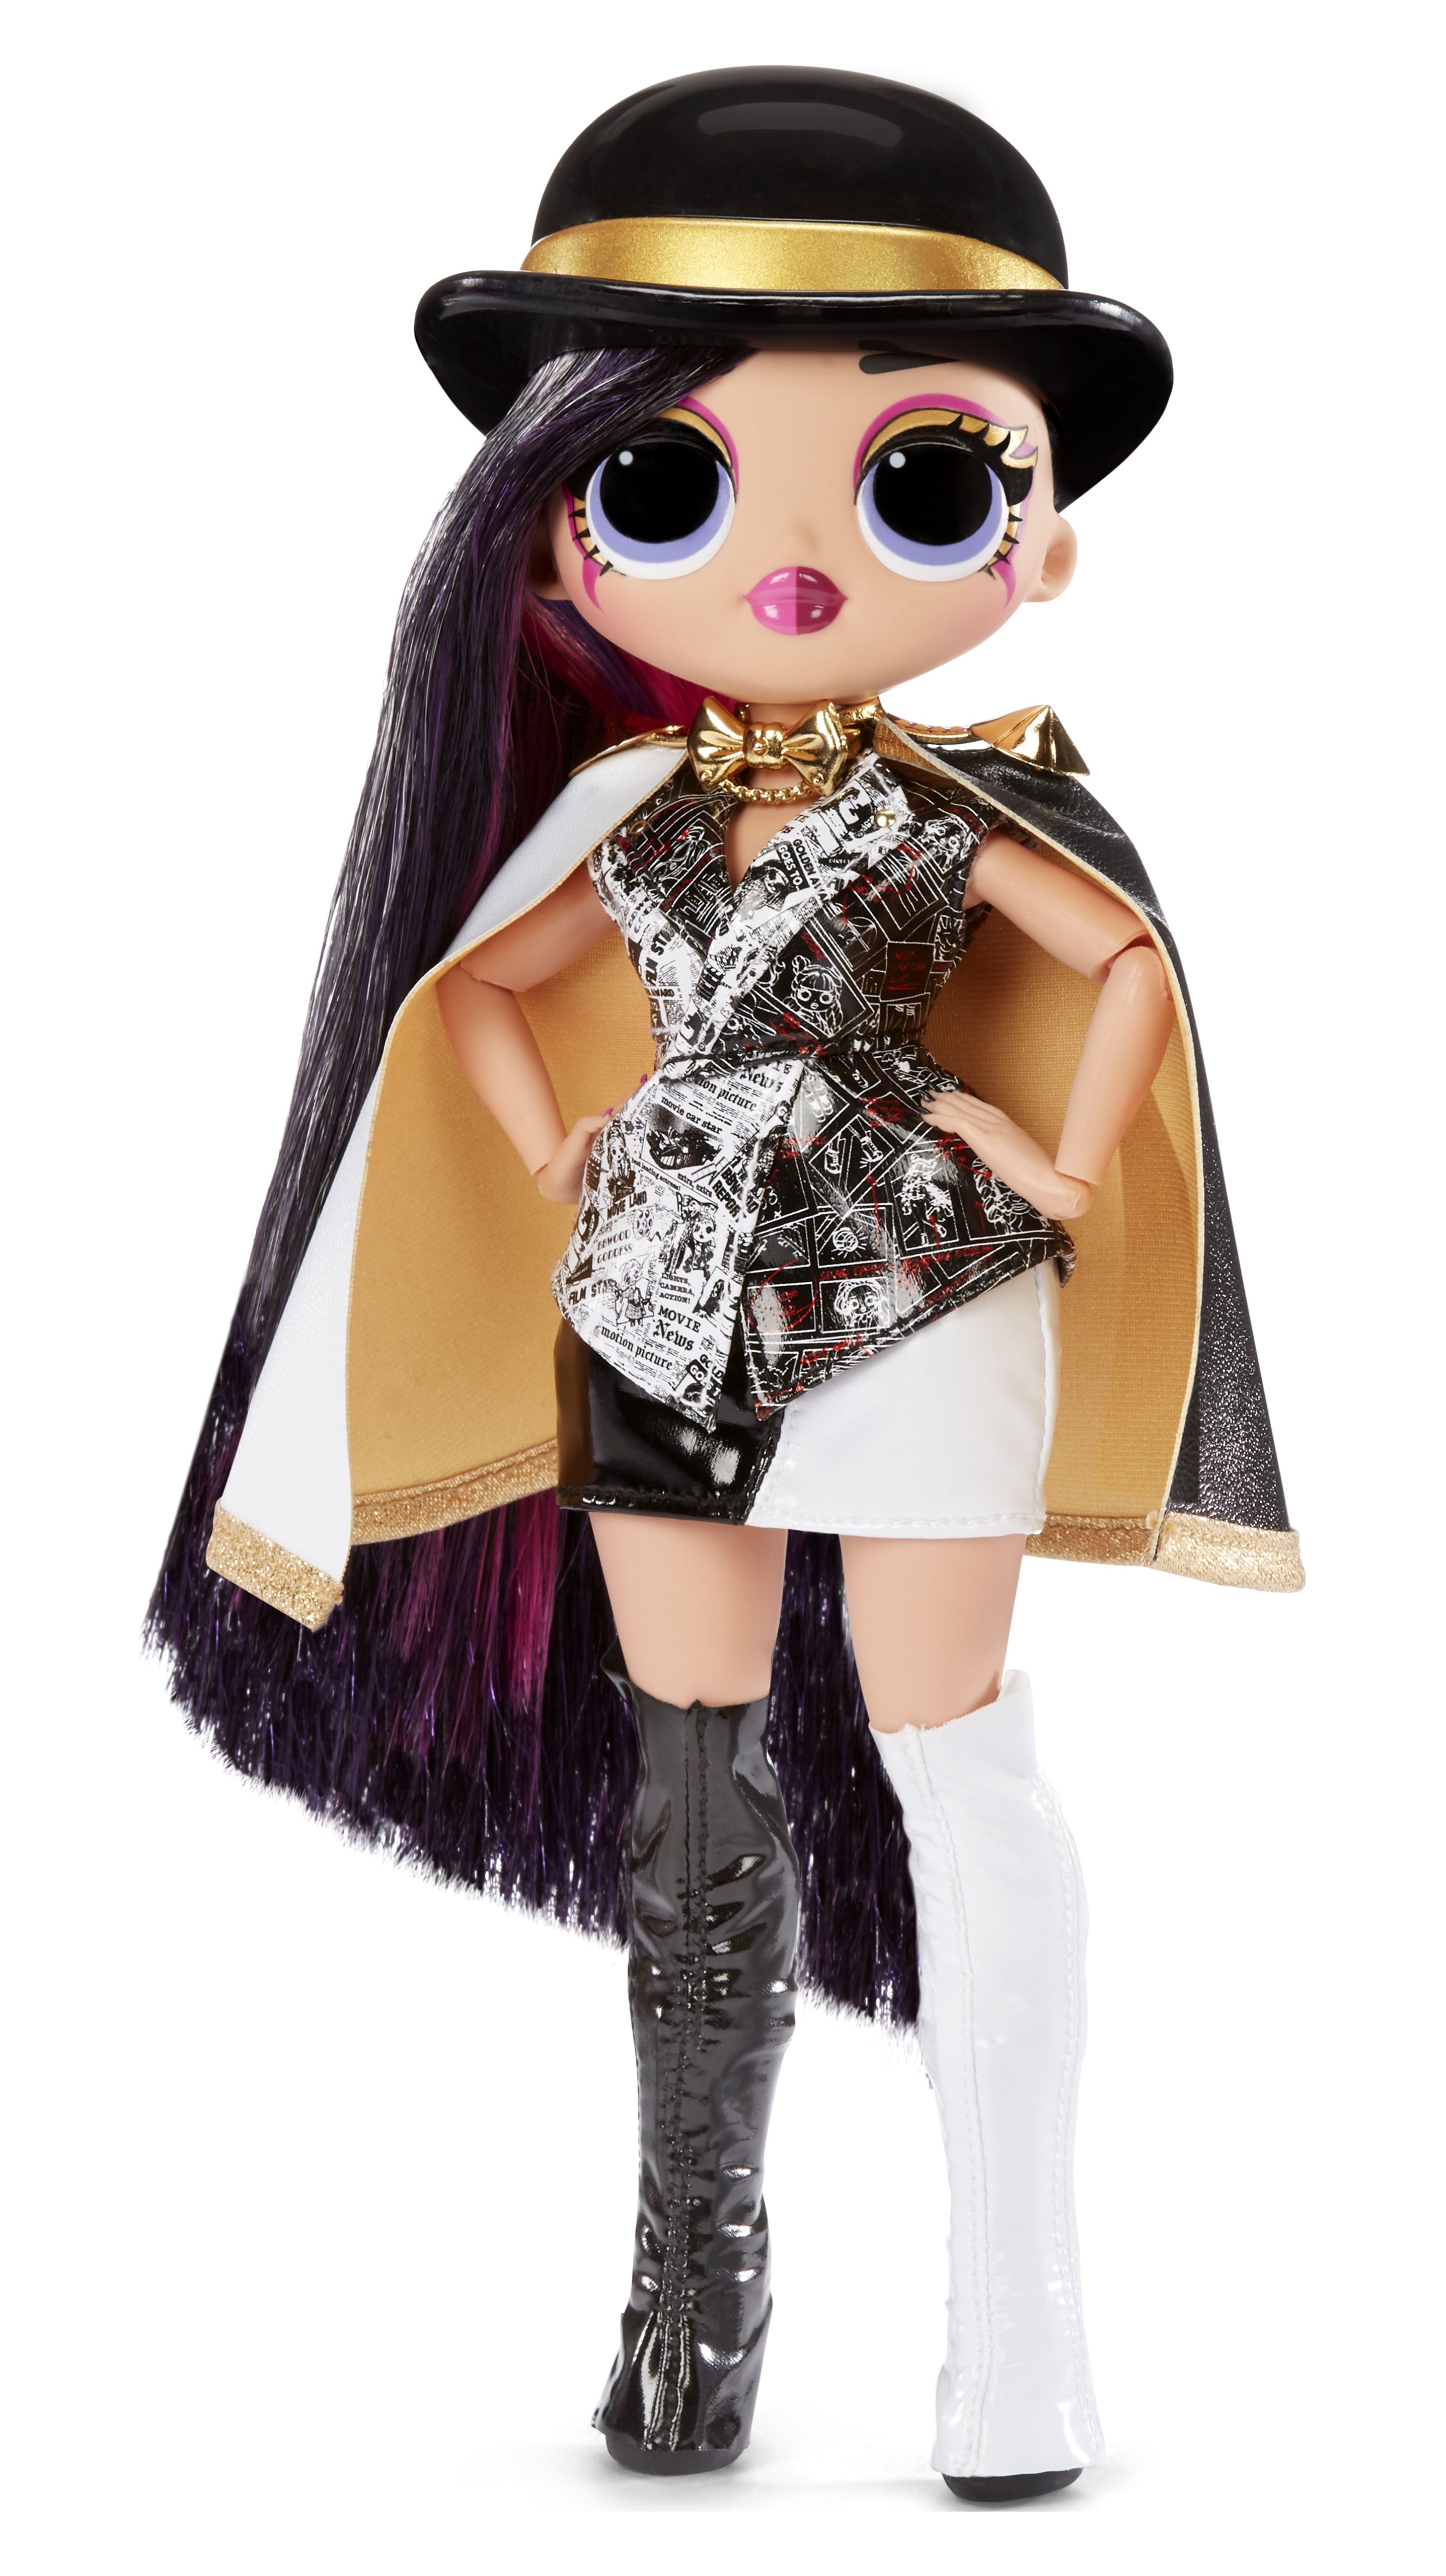 LOL Surprise Omg Movie Magic Ms. Direct Fashion Doll with 25 Surprises and Playset, Ages 4 and up - image 1 of 6